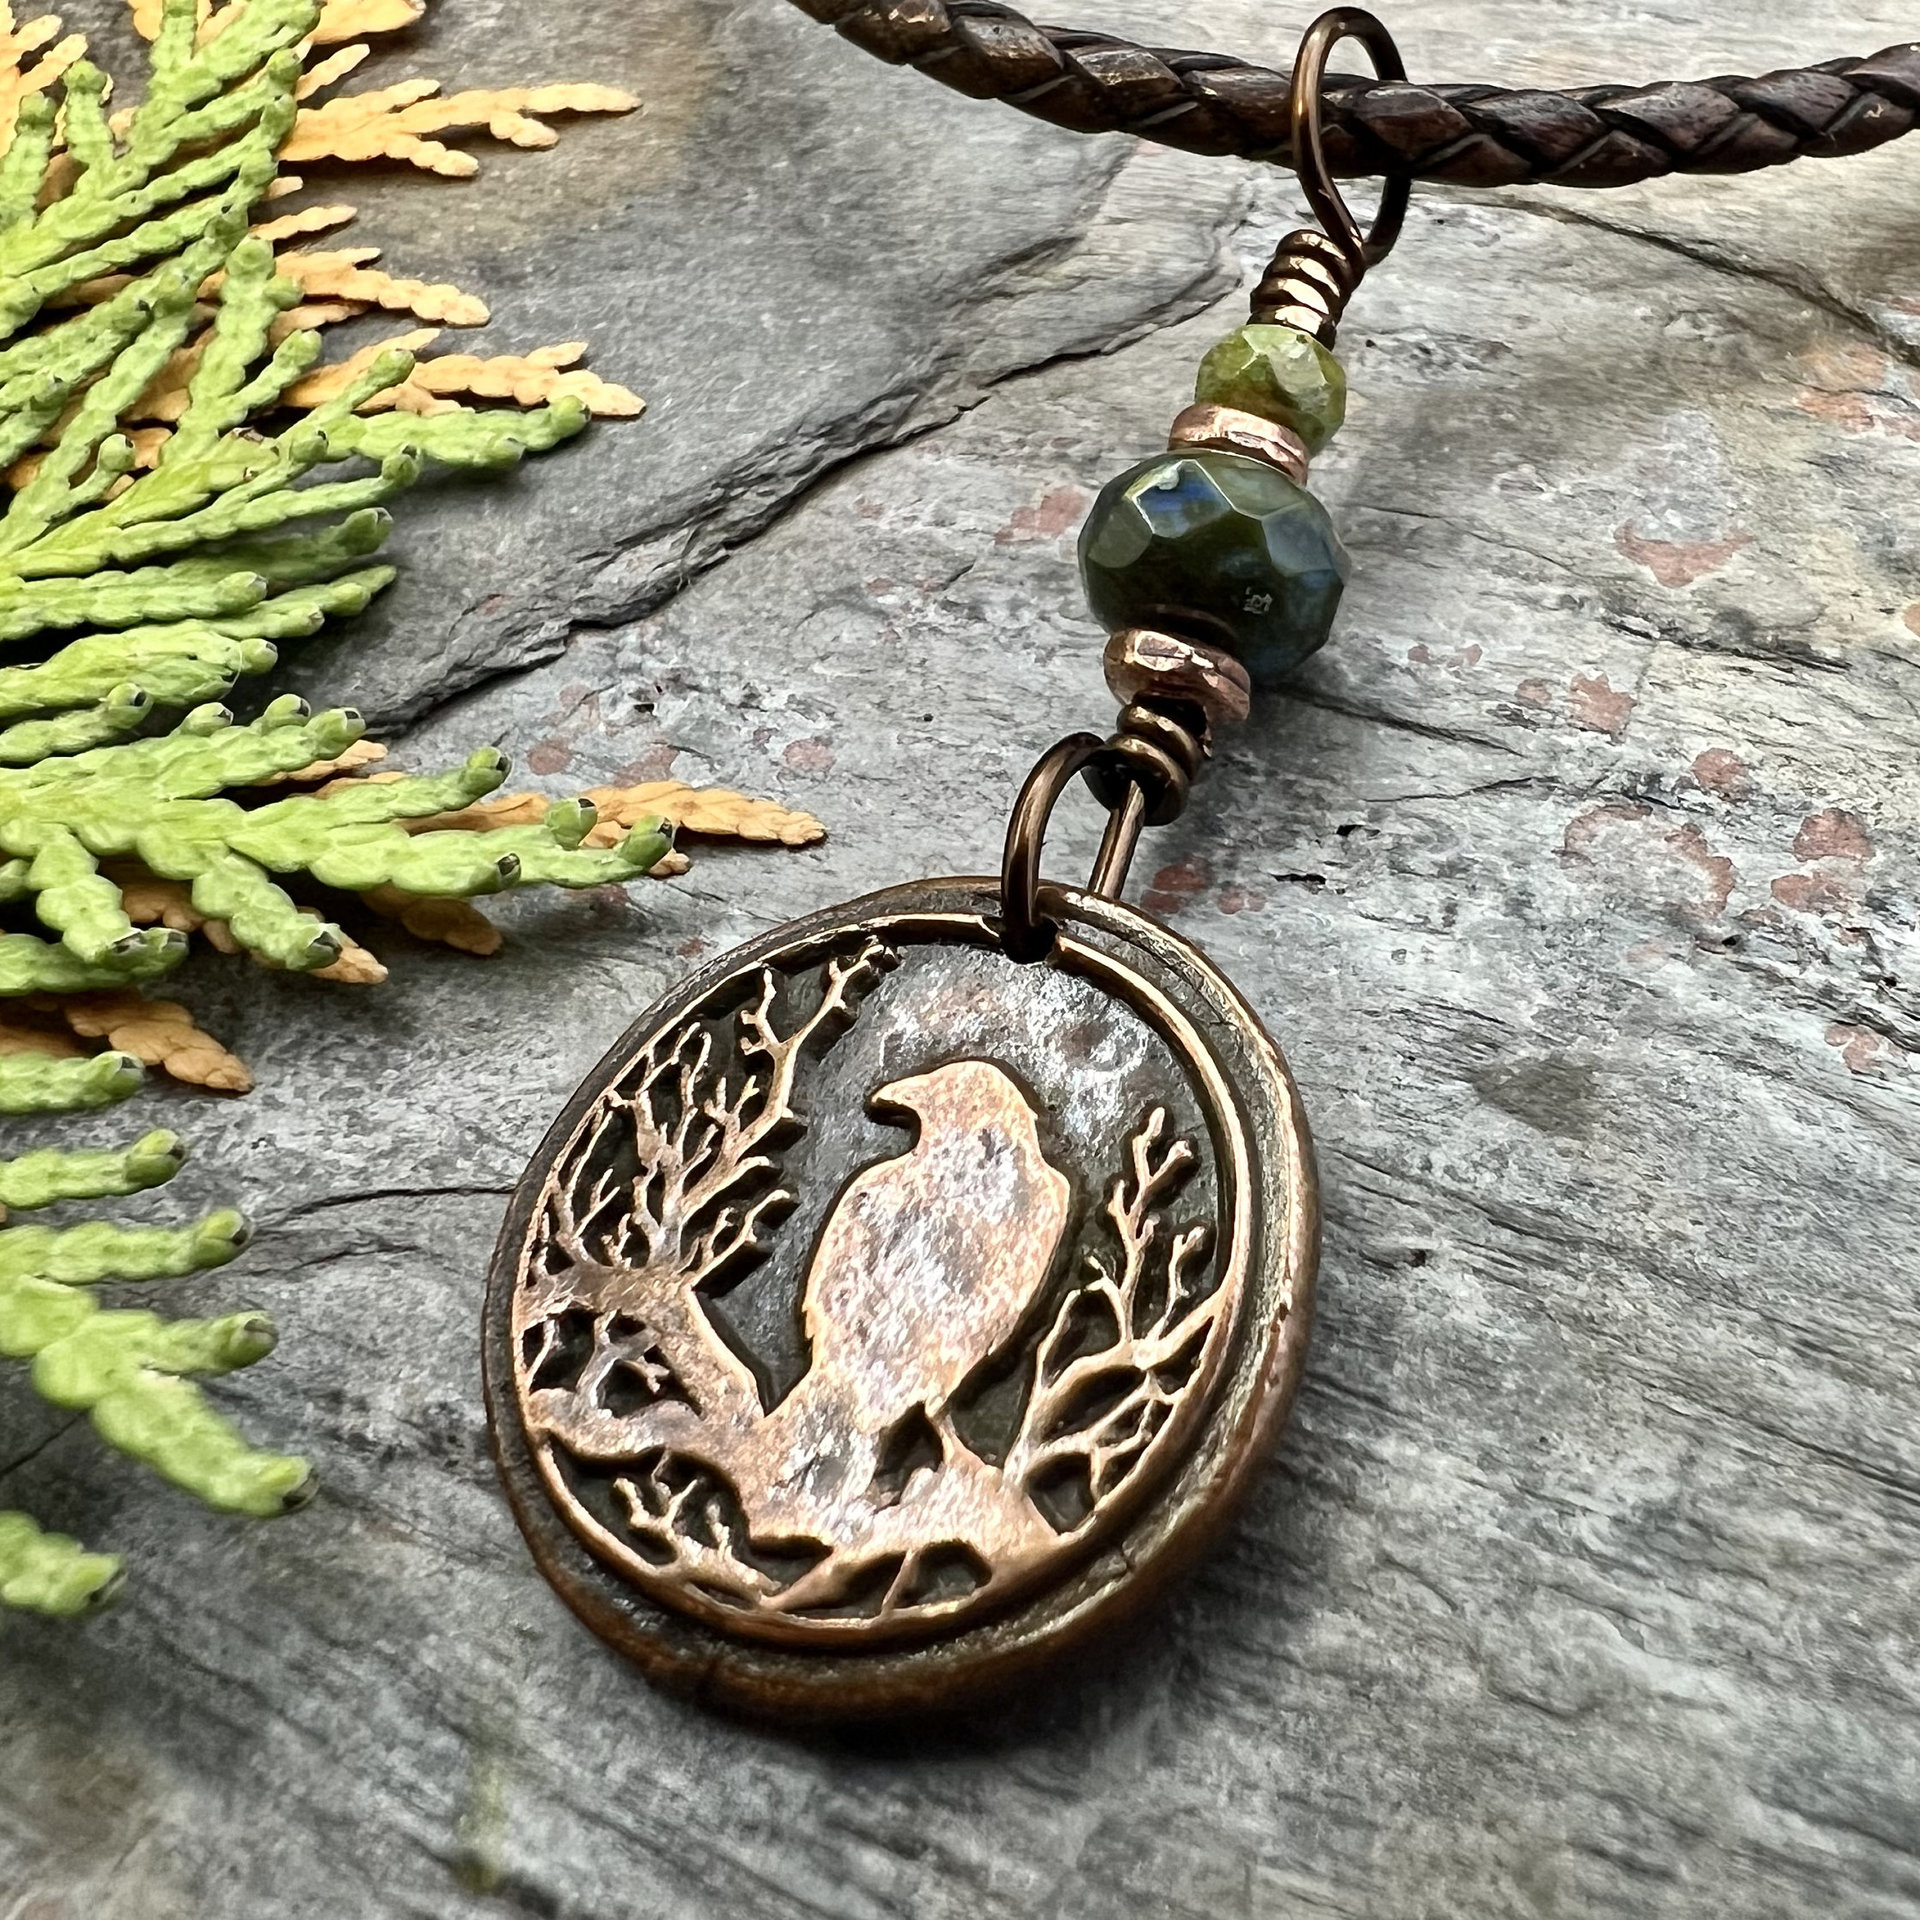 Raven Copper Pendant, Wax Seal Charm, Czech Glass Beads, Crow Corvid, Tree Branches, Pagan Samhain, Celtic Witch Jewelry, Earthy Rustic